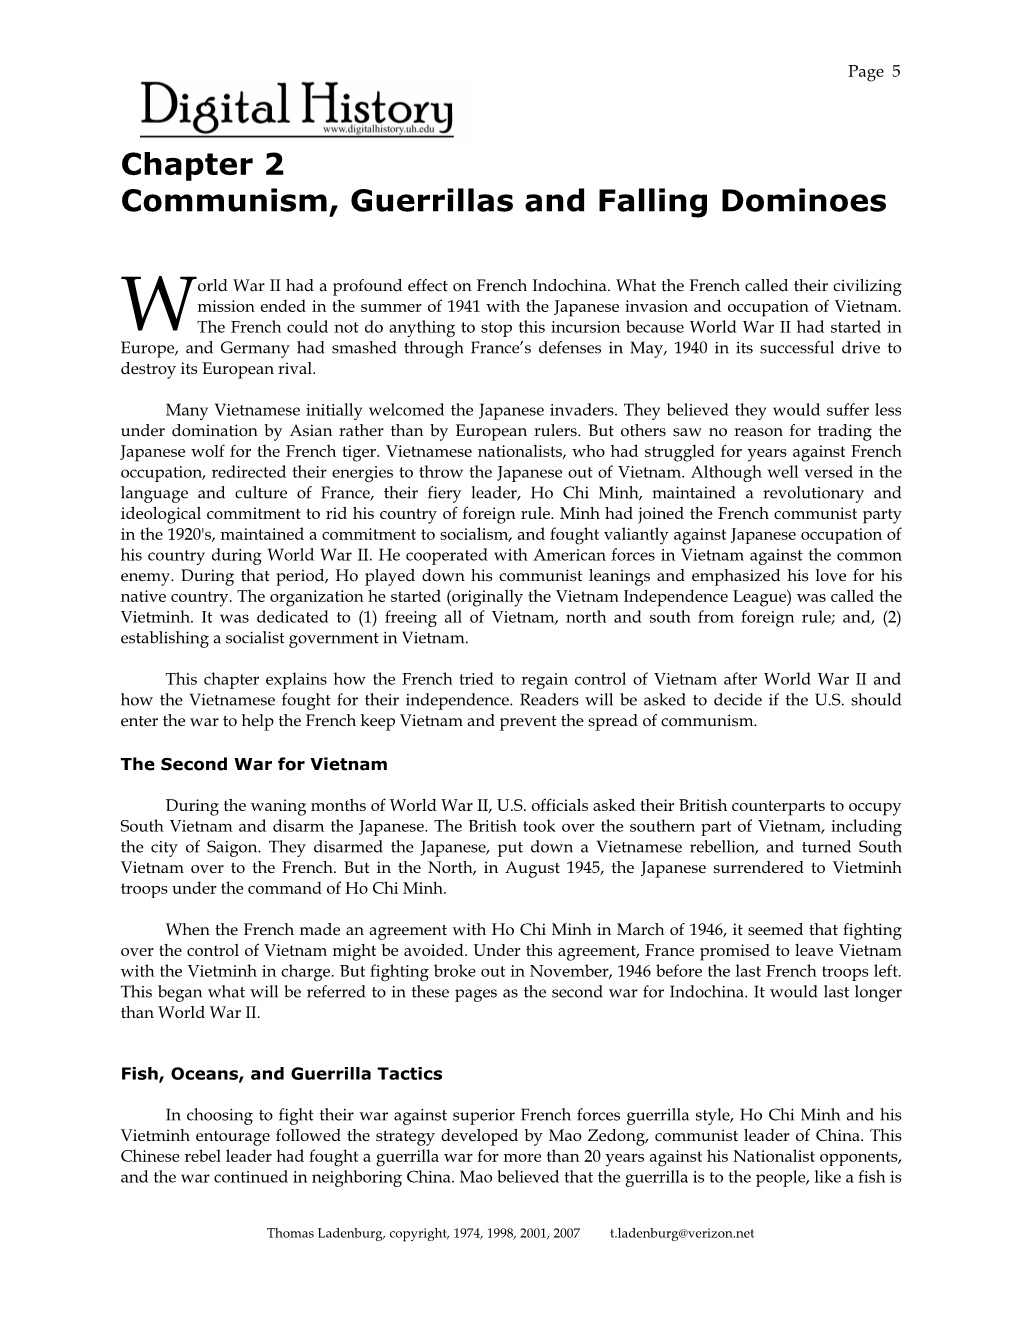 Chapter 2 Communism, Guerrillas and Falling Dominoes